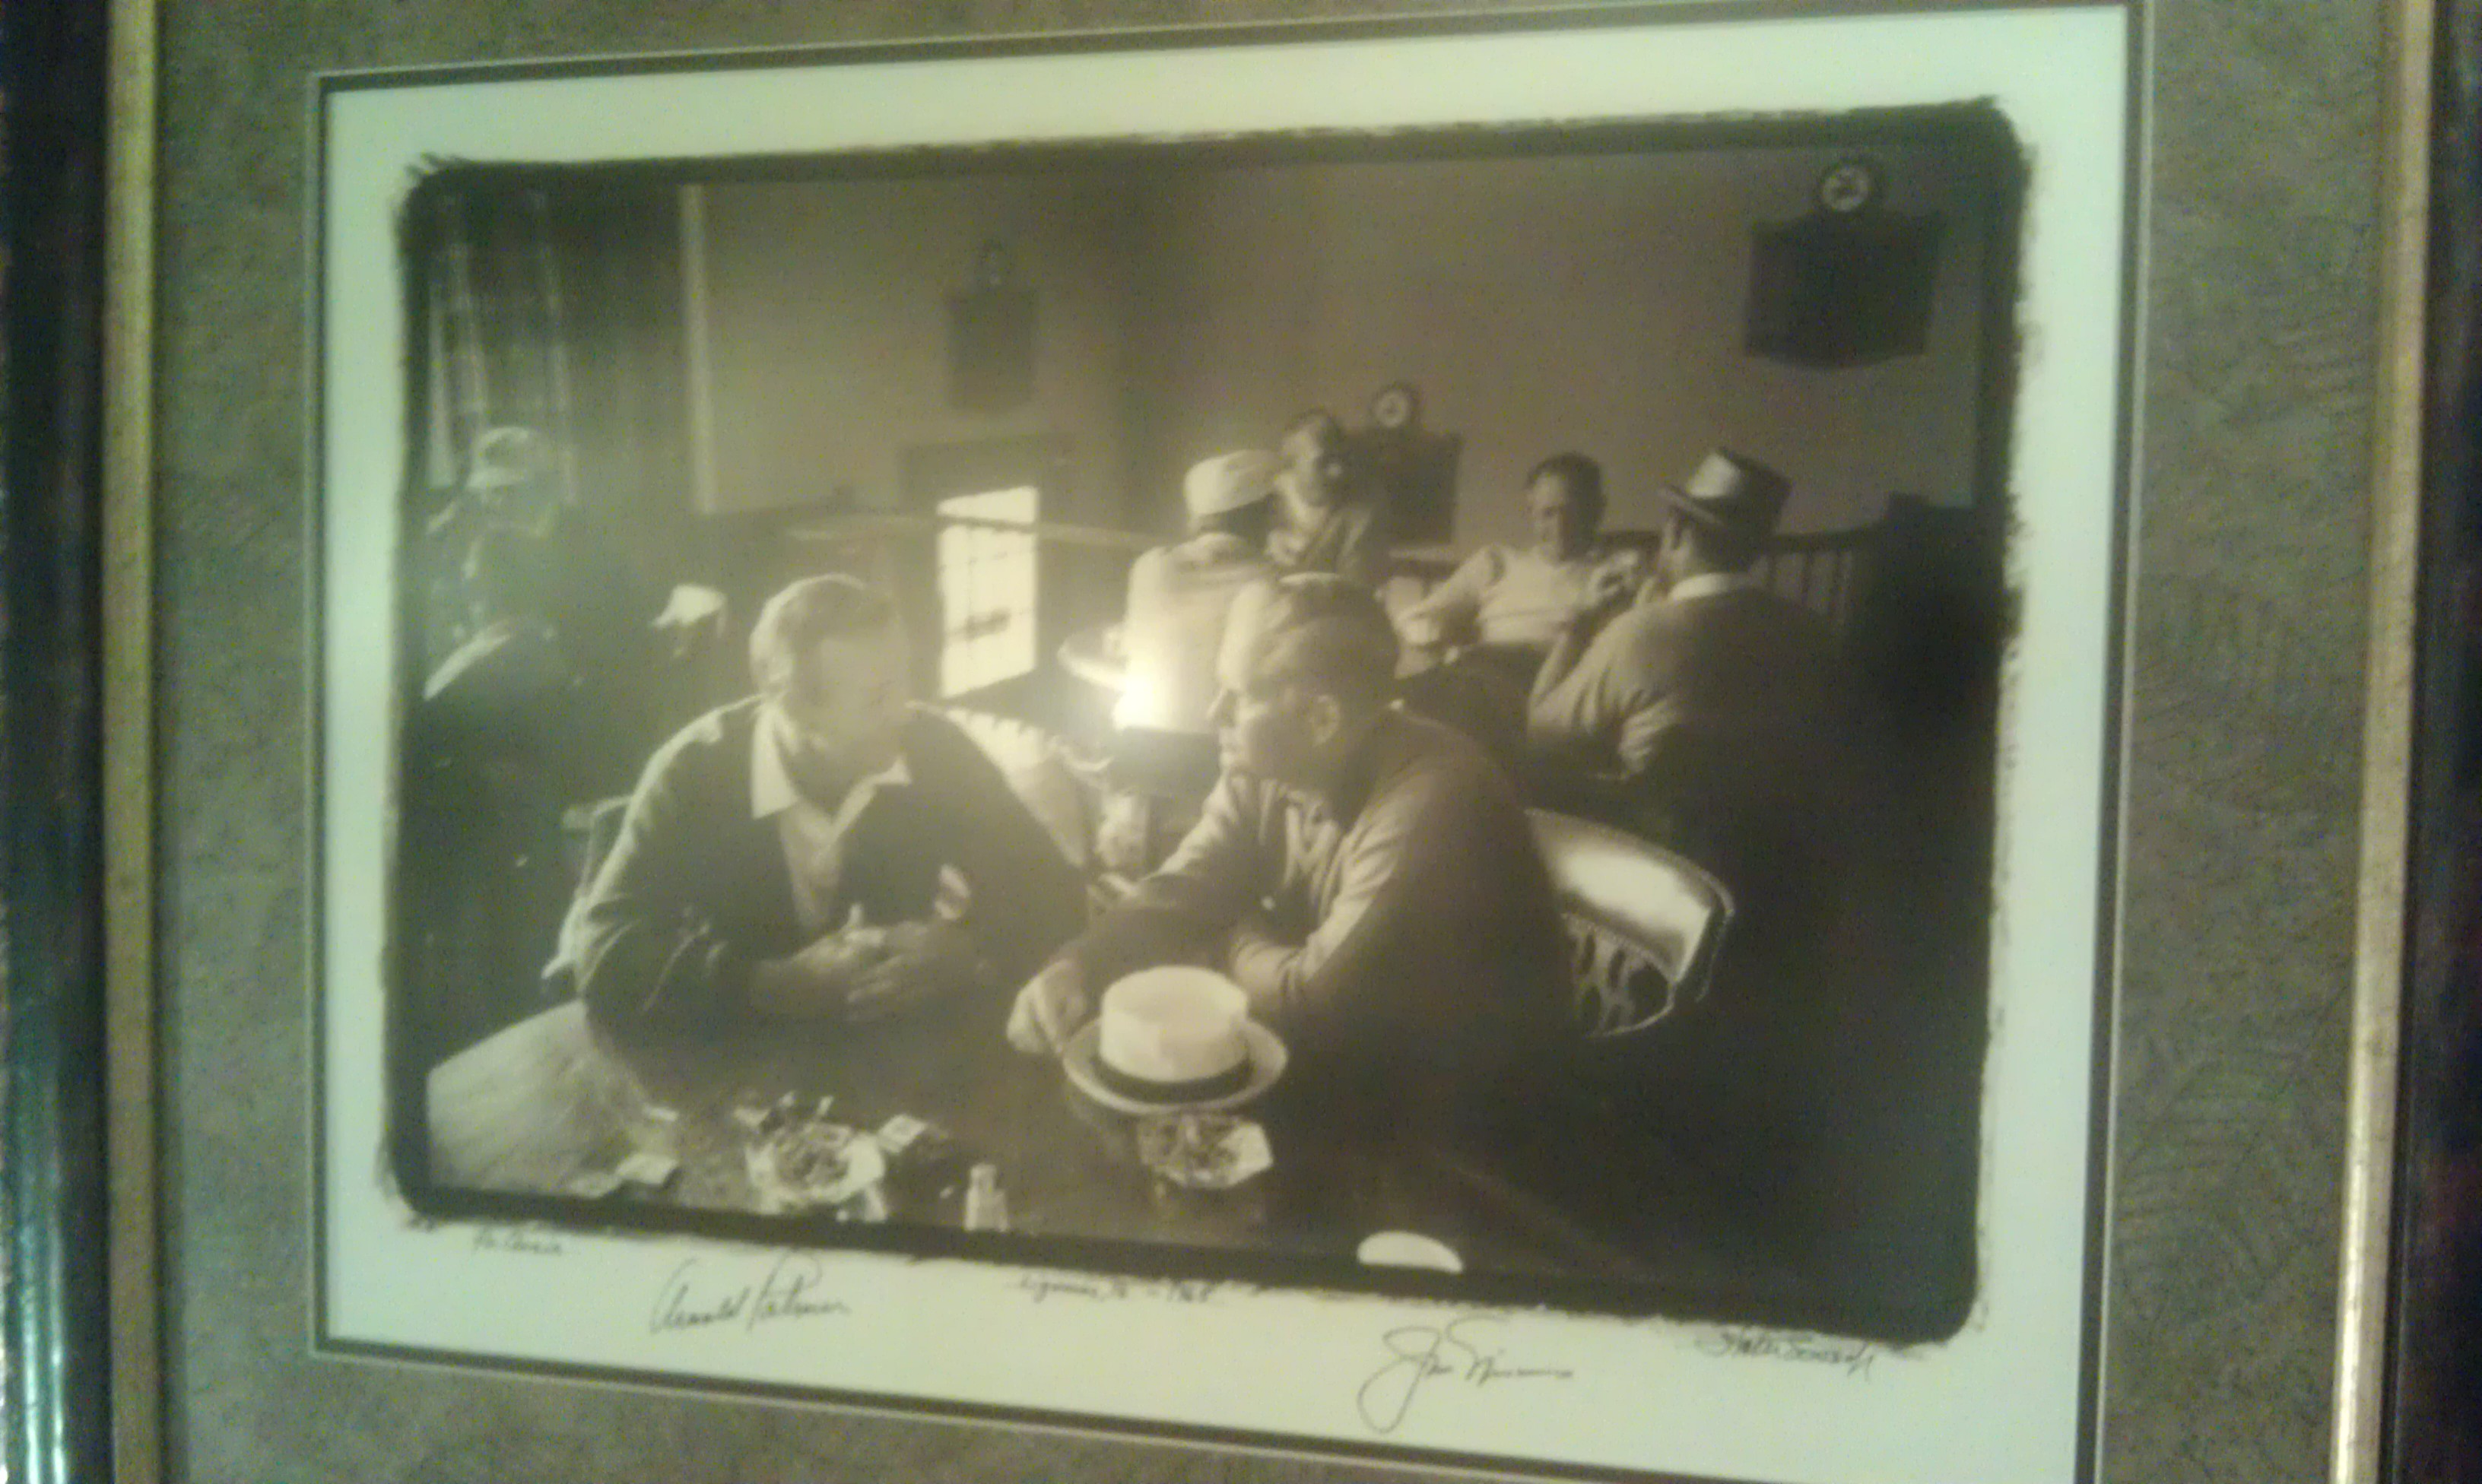 Latrobe Country Club: Signed photo of Jack Nicklaus and Arnold Palmer